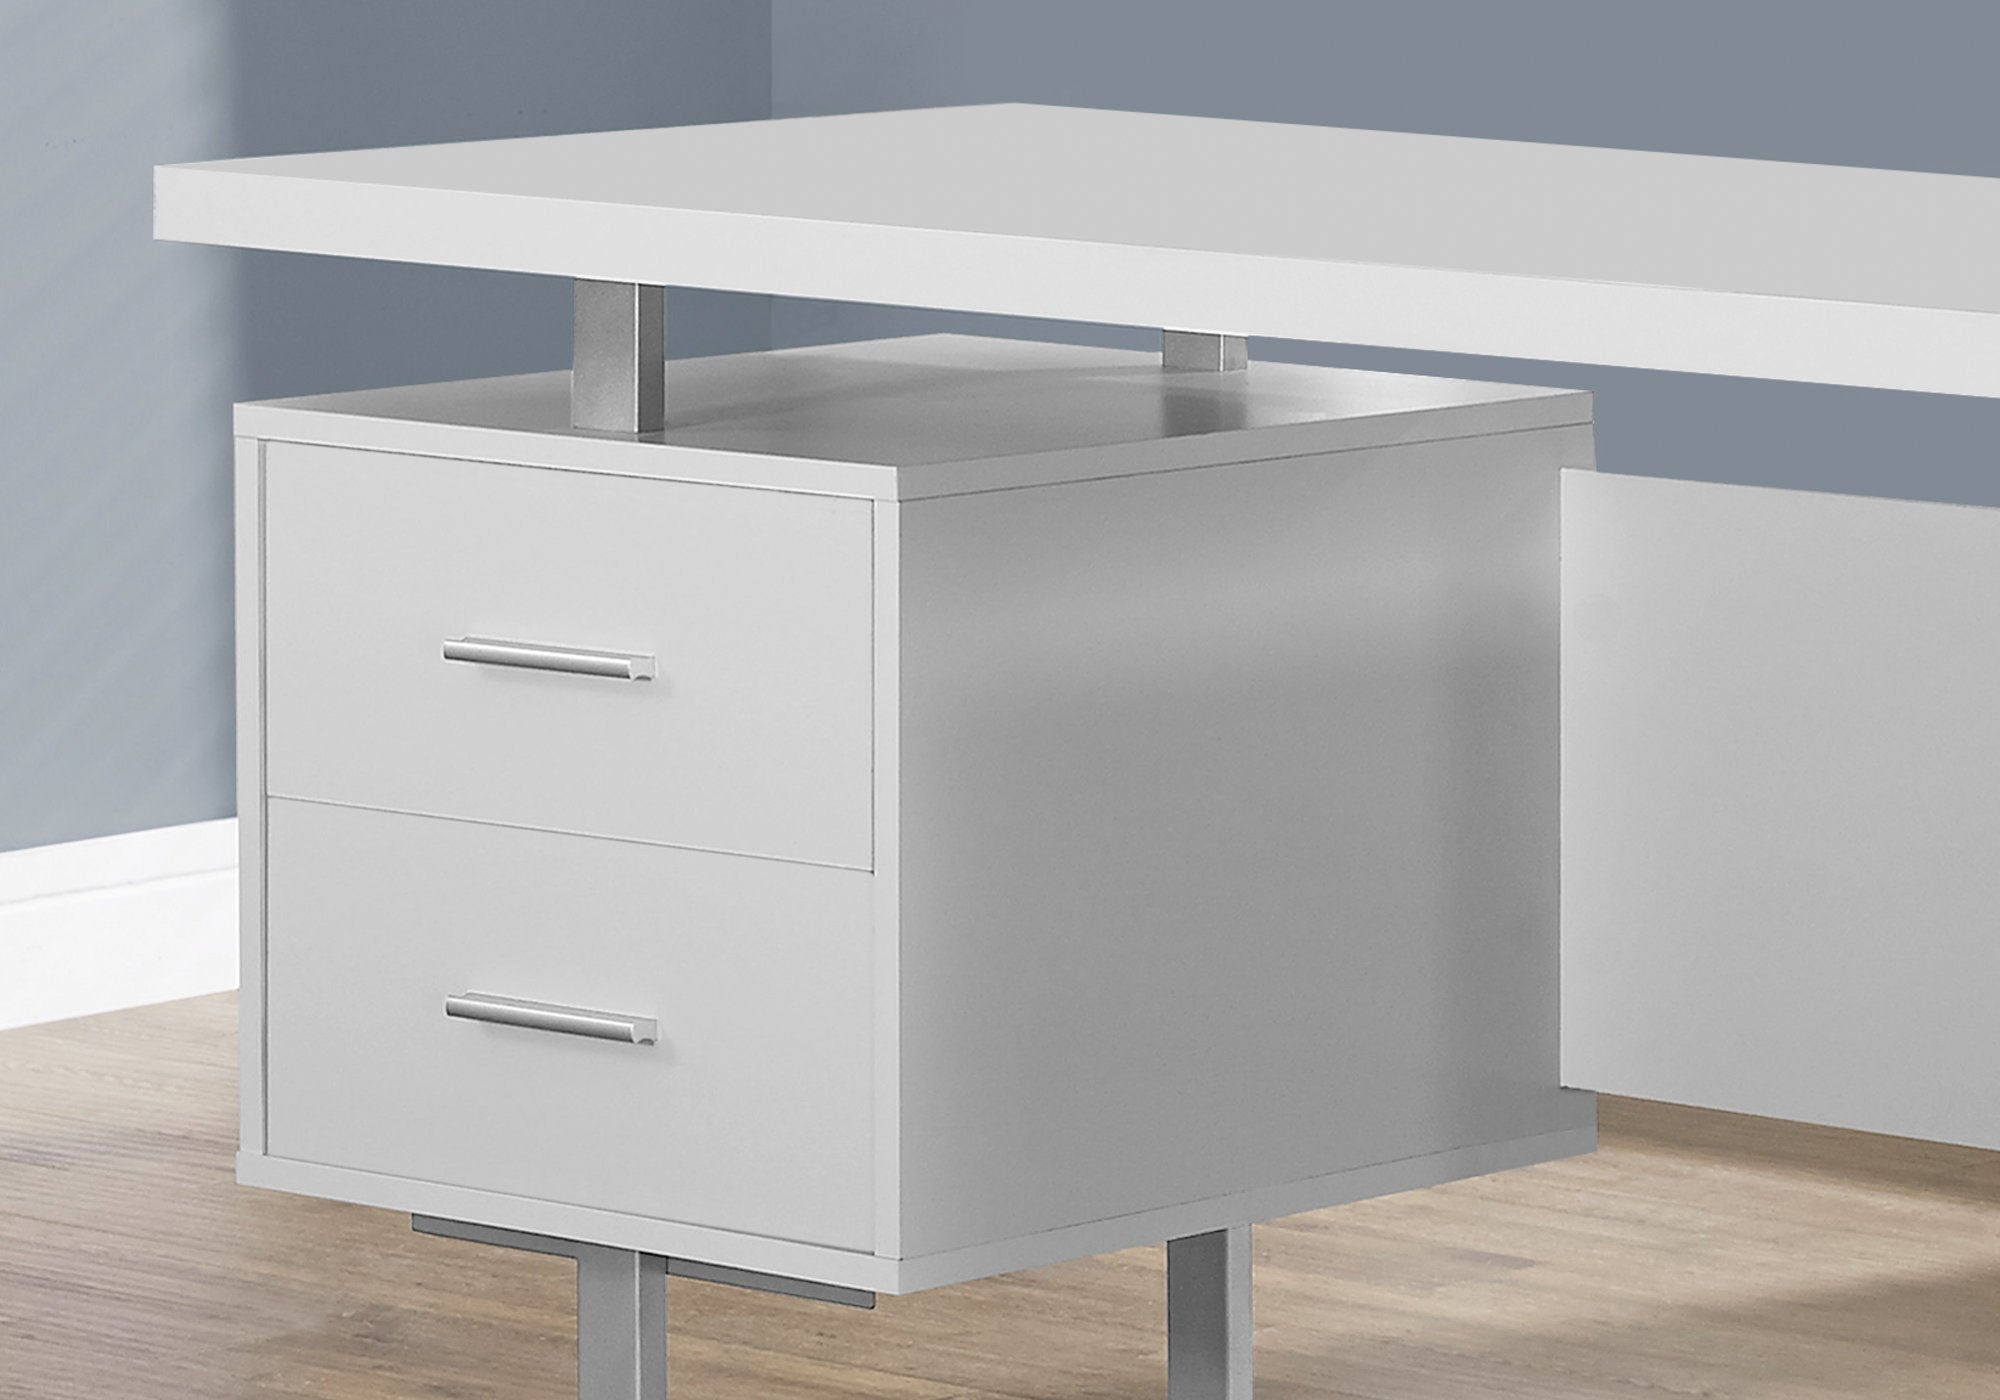 MN-947081    Computer Desk, Home Office, Laptop, Left, Right Set-Up, Storage Drawers, 60"L, Metal, Laminate, White, Grey, Contemporary, Modern